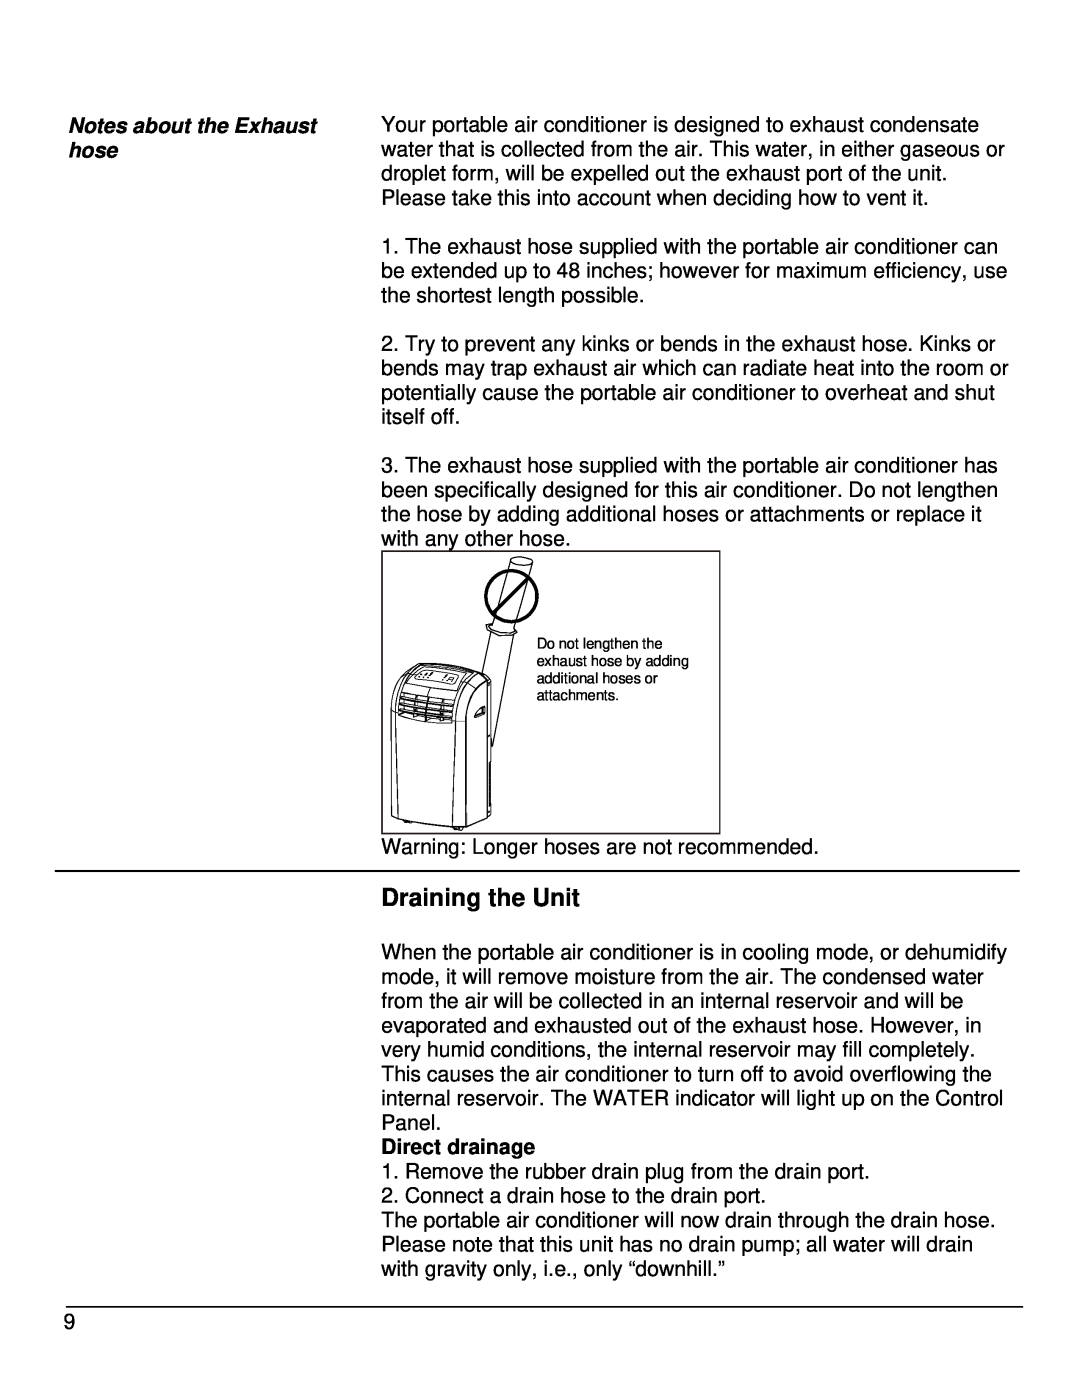 EdgeStar AP12000S-1 owner manual Draining the Unit, Notes about the Exhaust hose, Direct drainage 